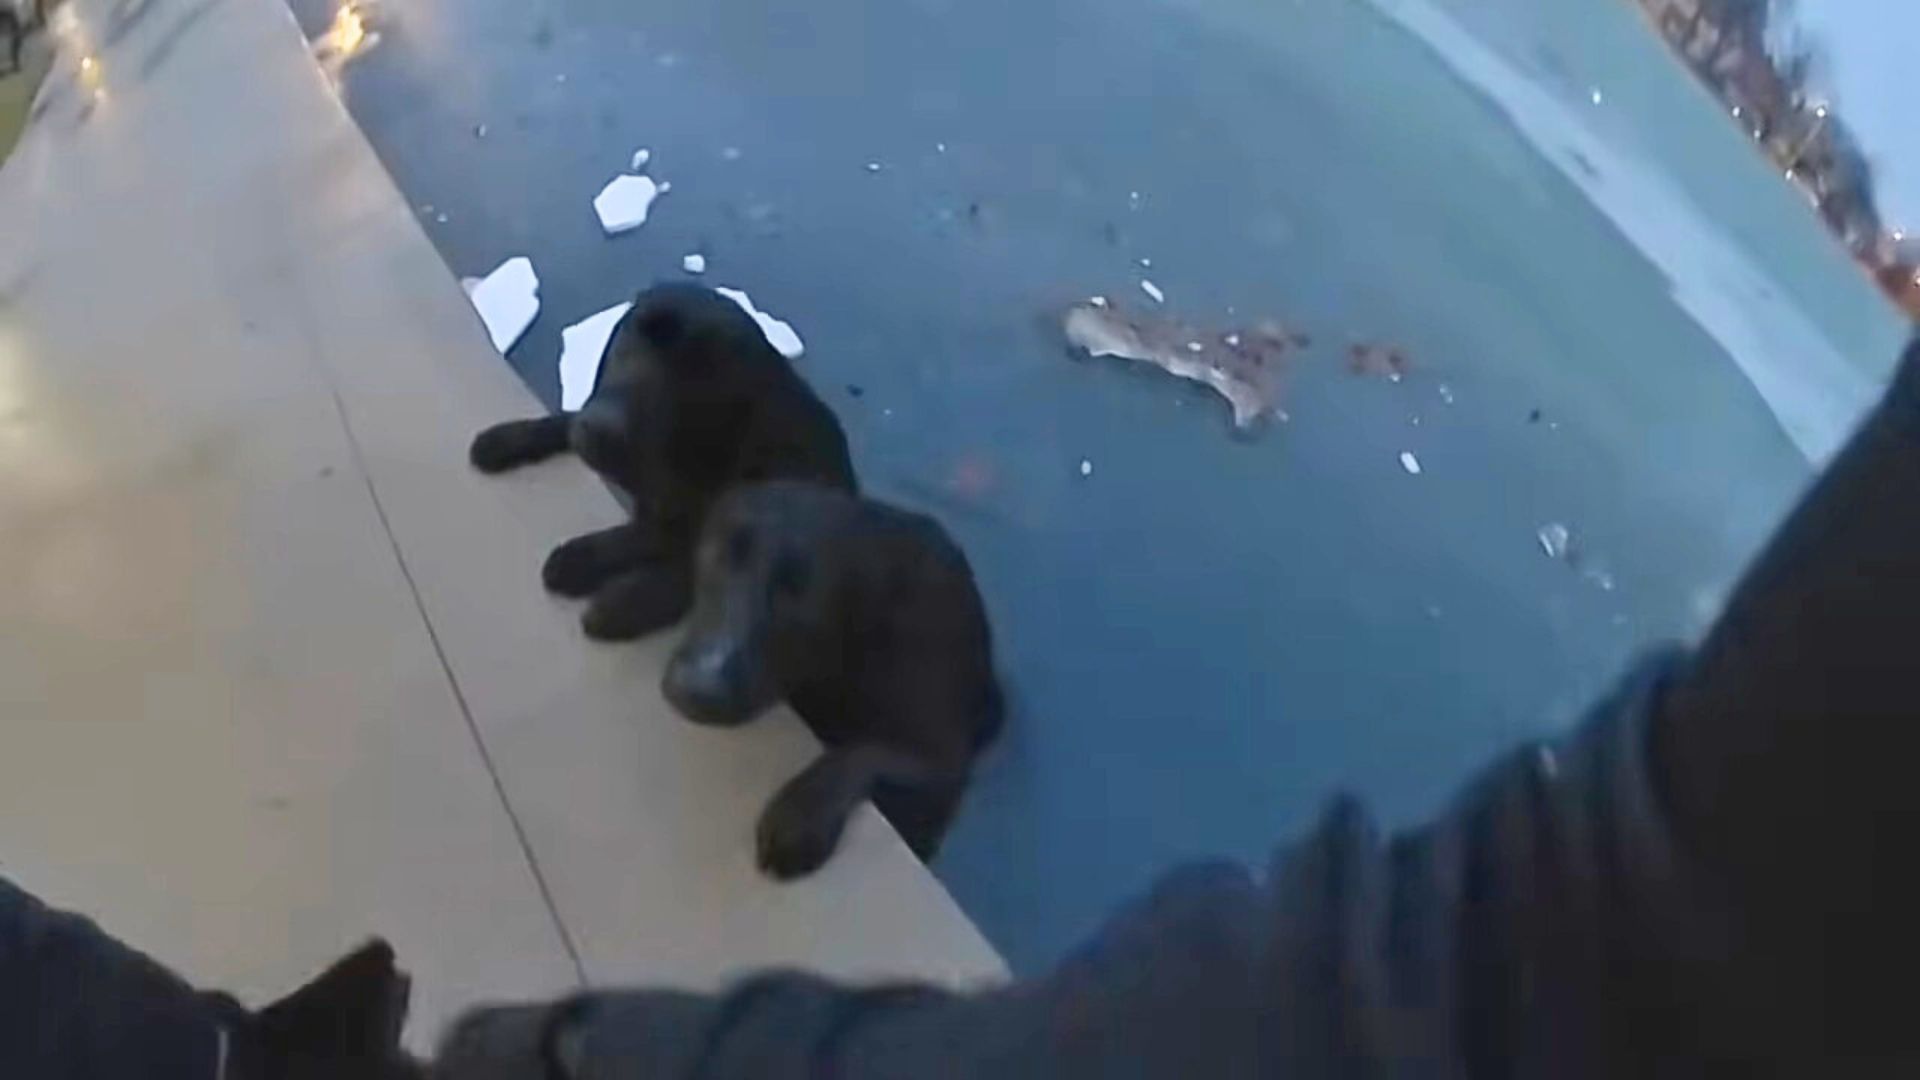 Big-Hearted Officer Jumps Into Action To Save Two Trembling Dogs From The Icy Pond